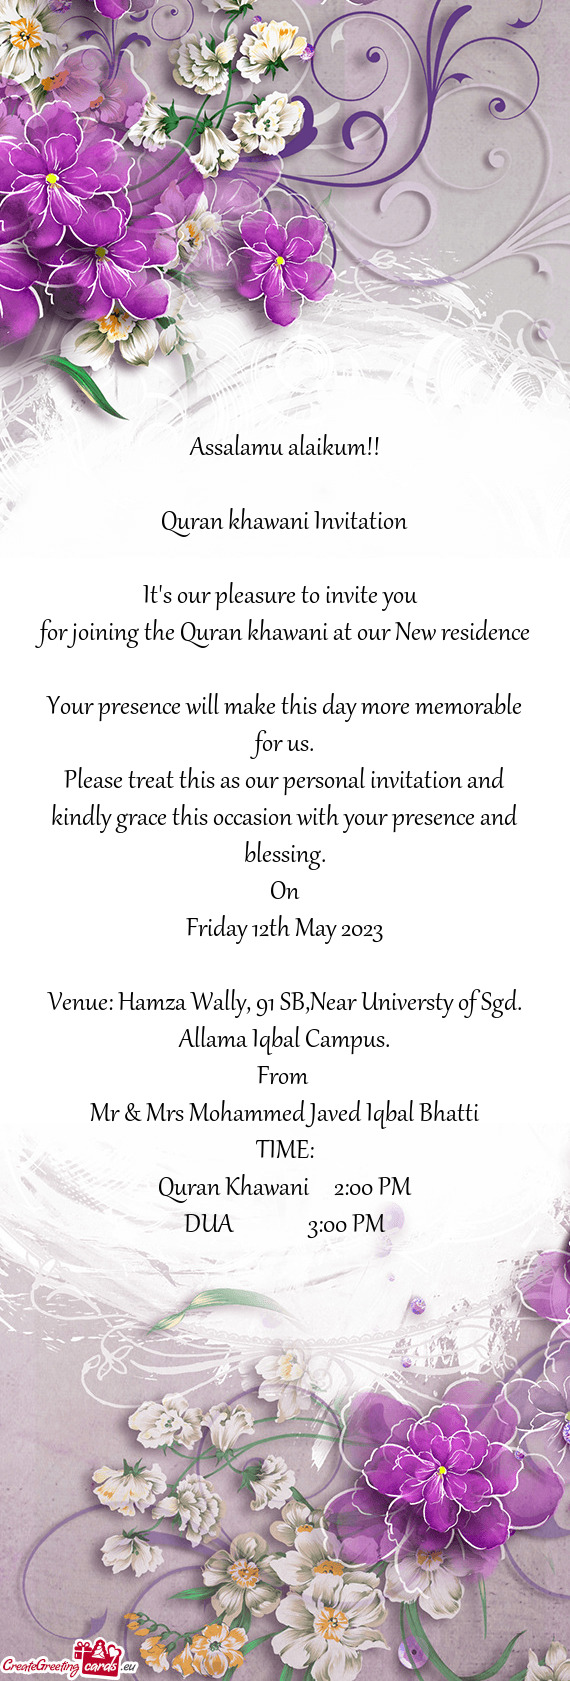 For joining the Quran khawani at our New residence